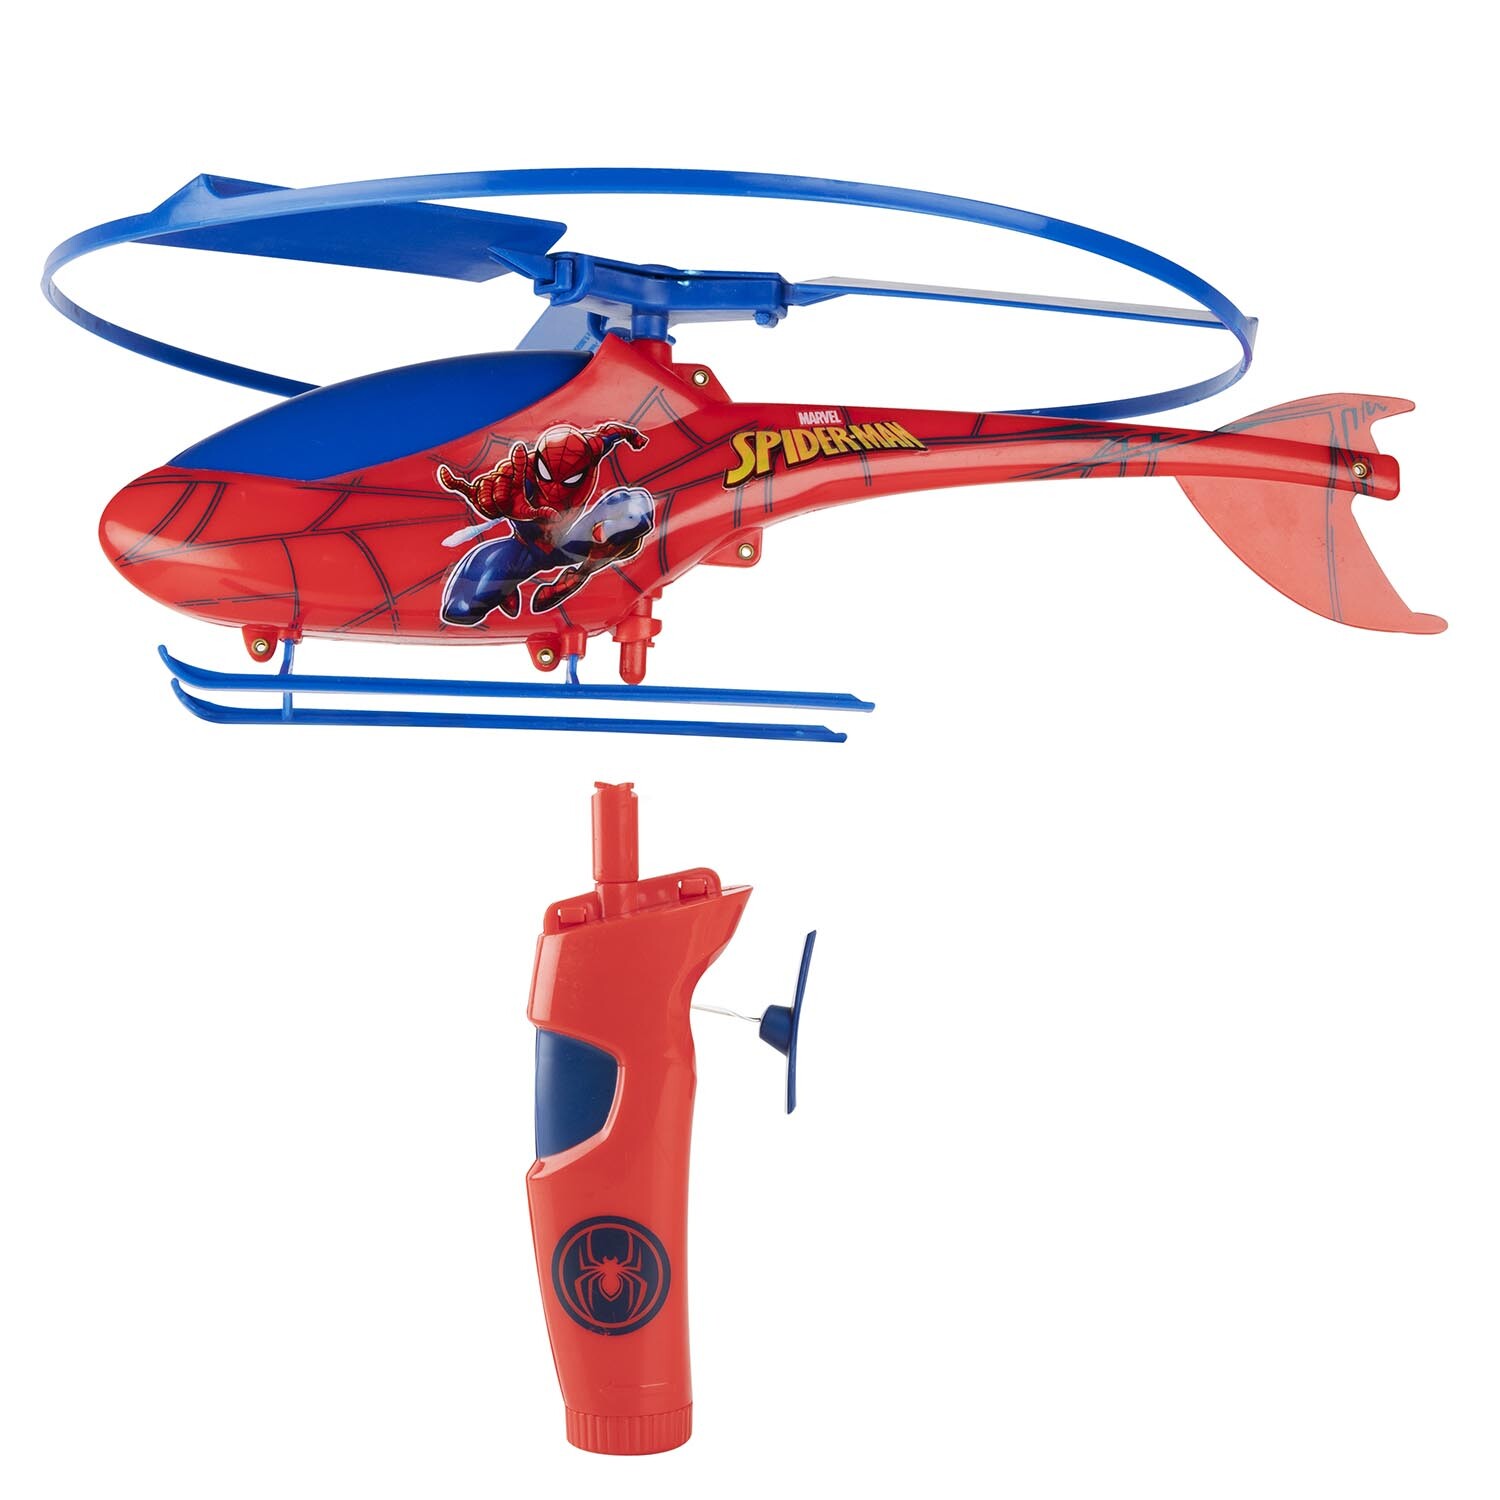 Spiderman Rescue Helicopter with Launcher Image 1